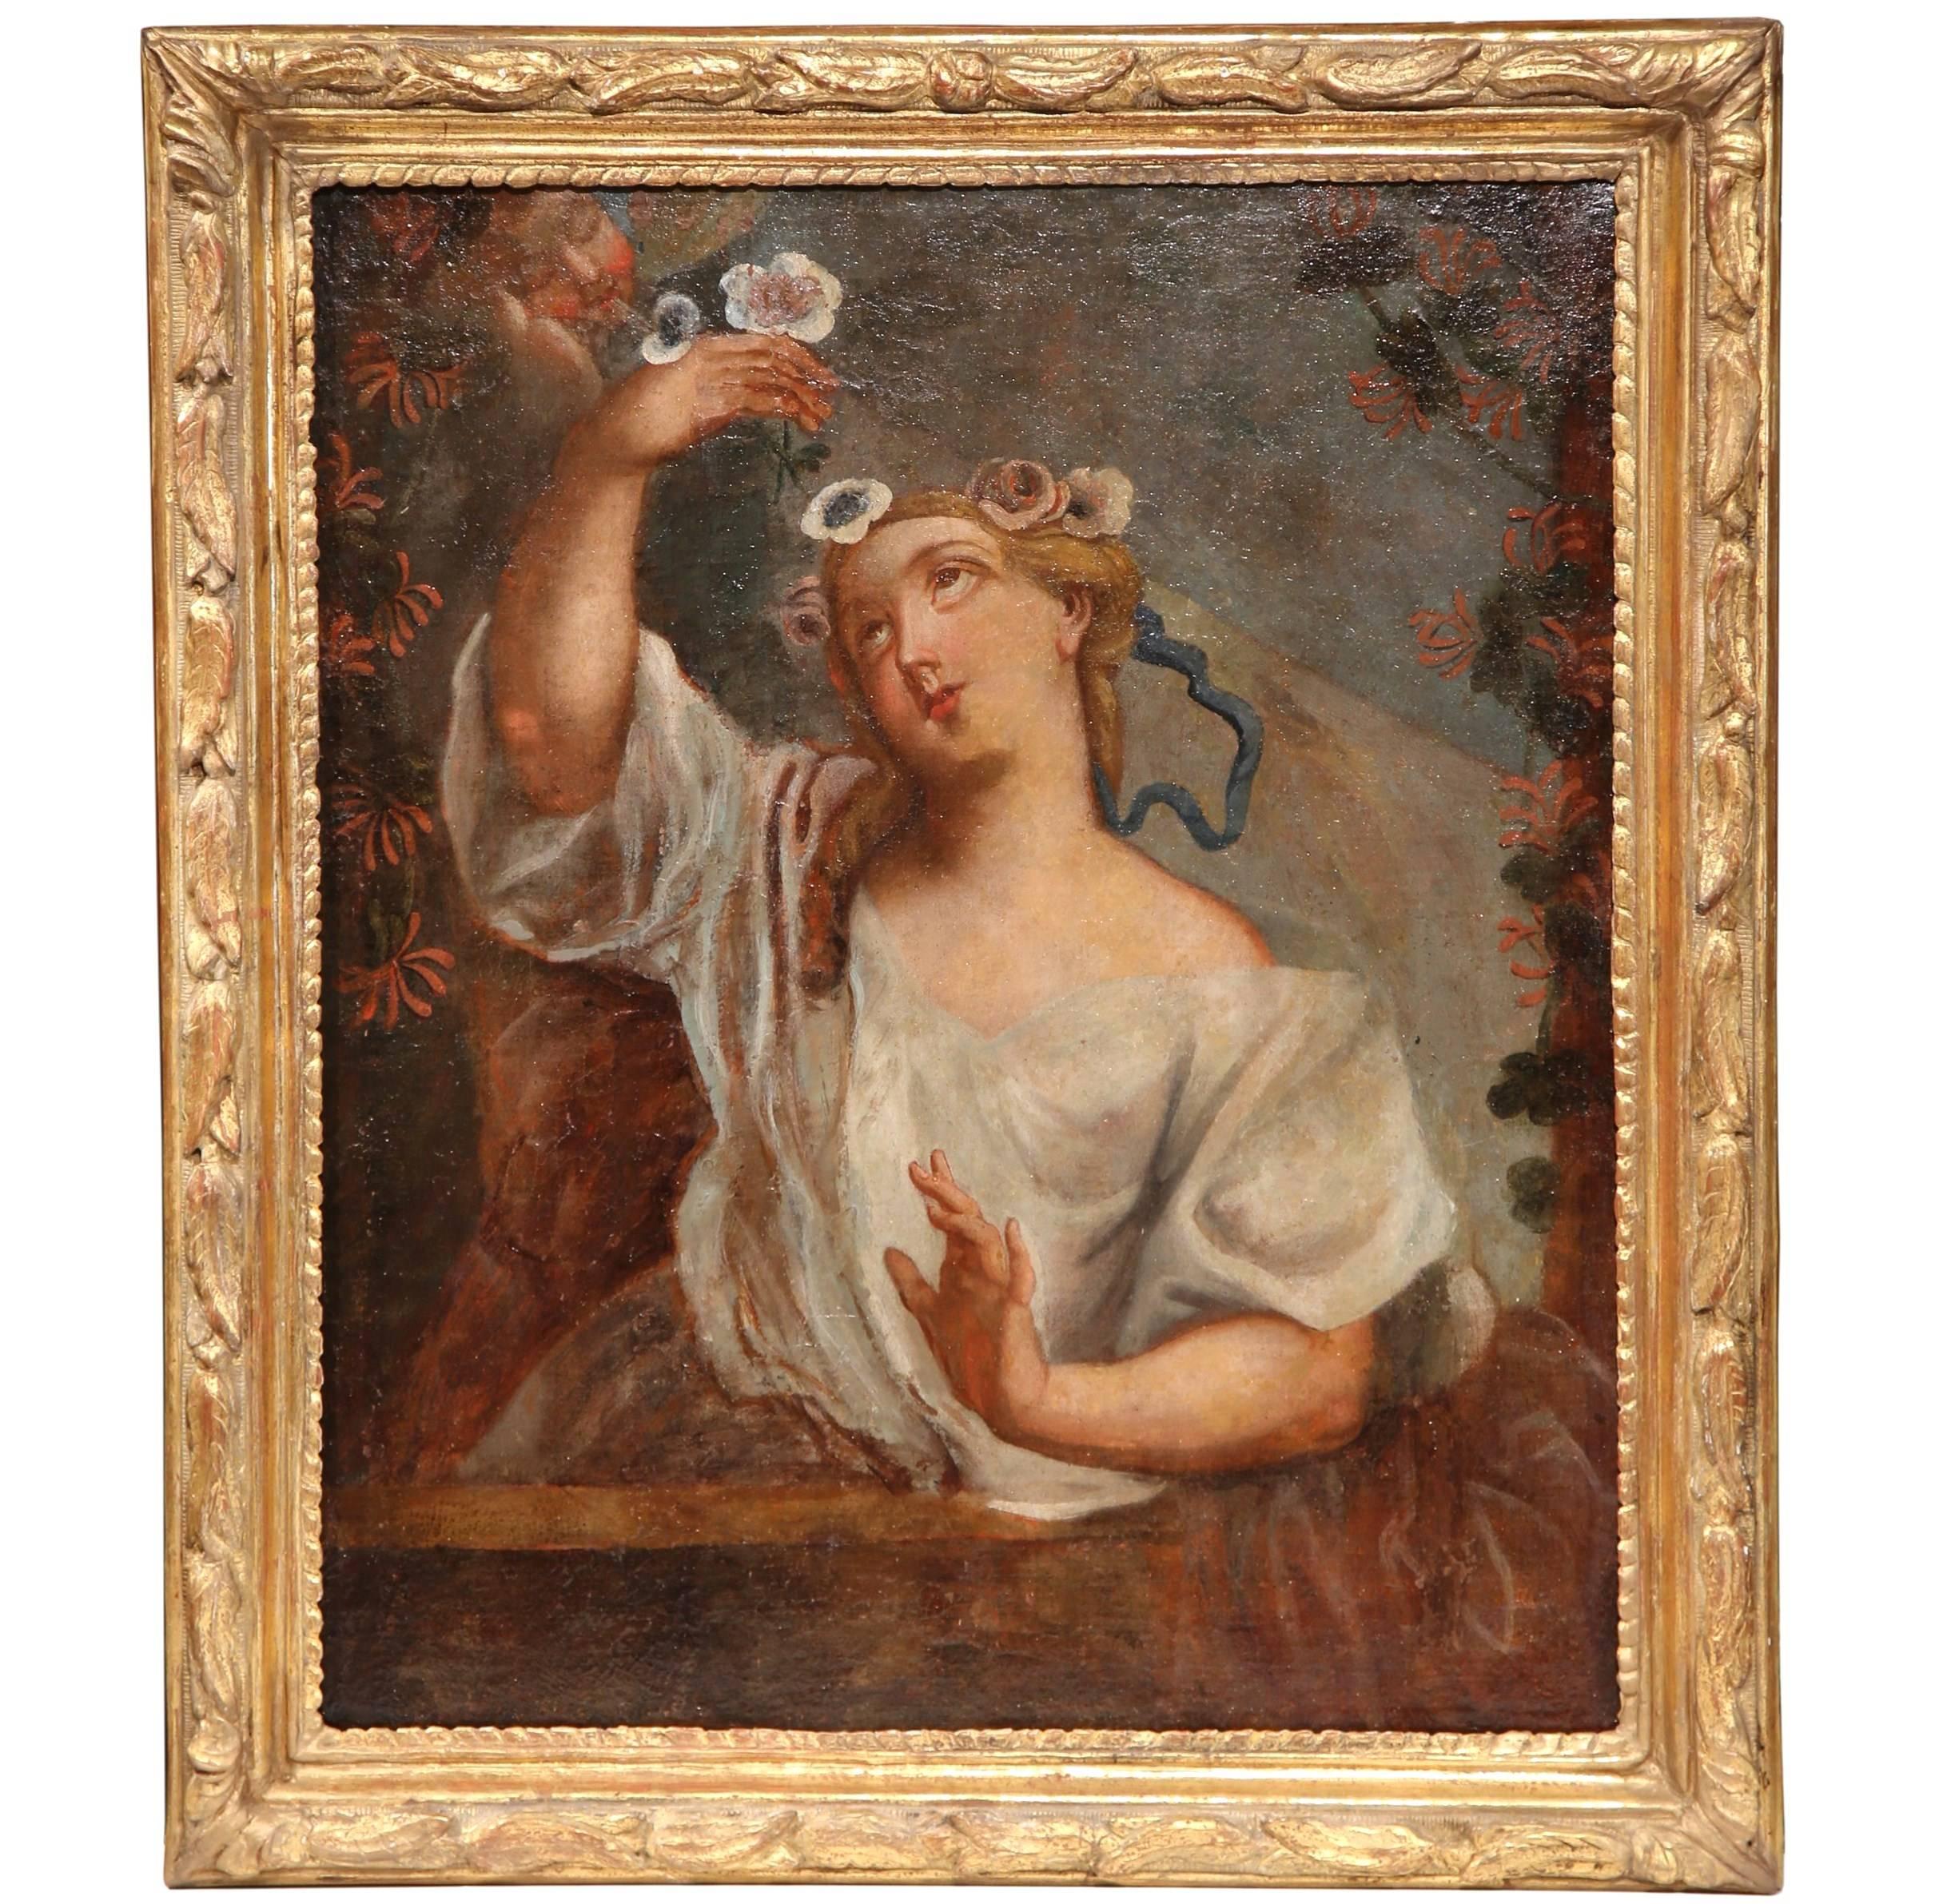 Unknown Figurative Painting - Early 18th Century Oil on Canvas Painting of a Young Beauty in Carved Gilt Frame